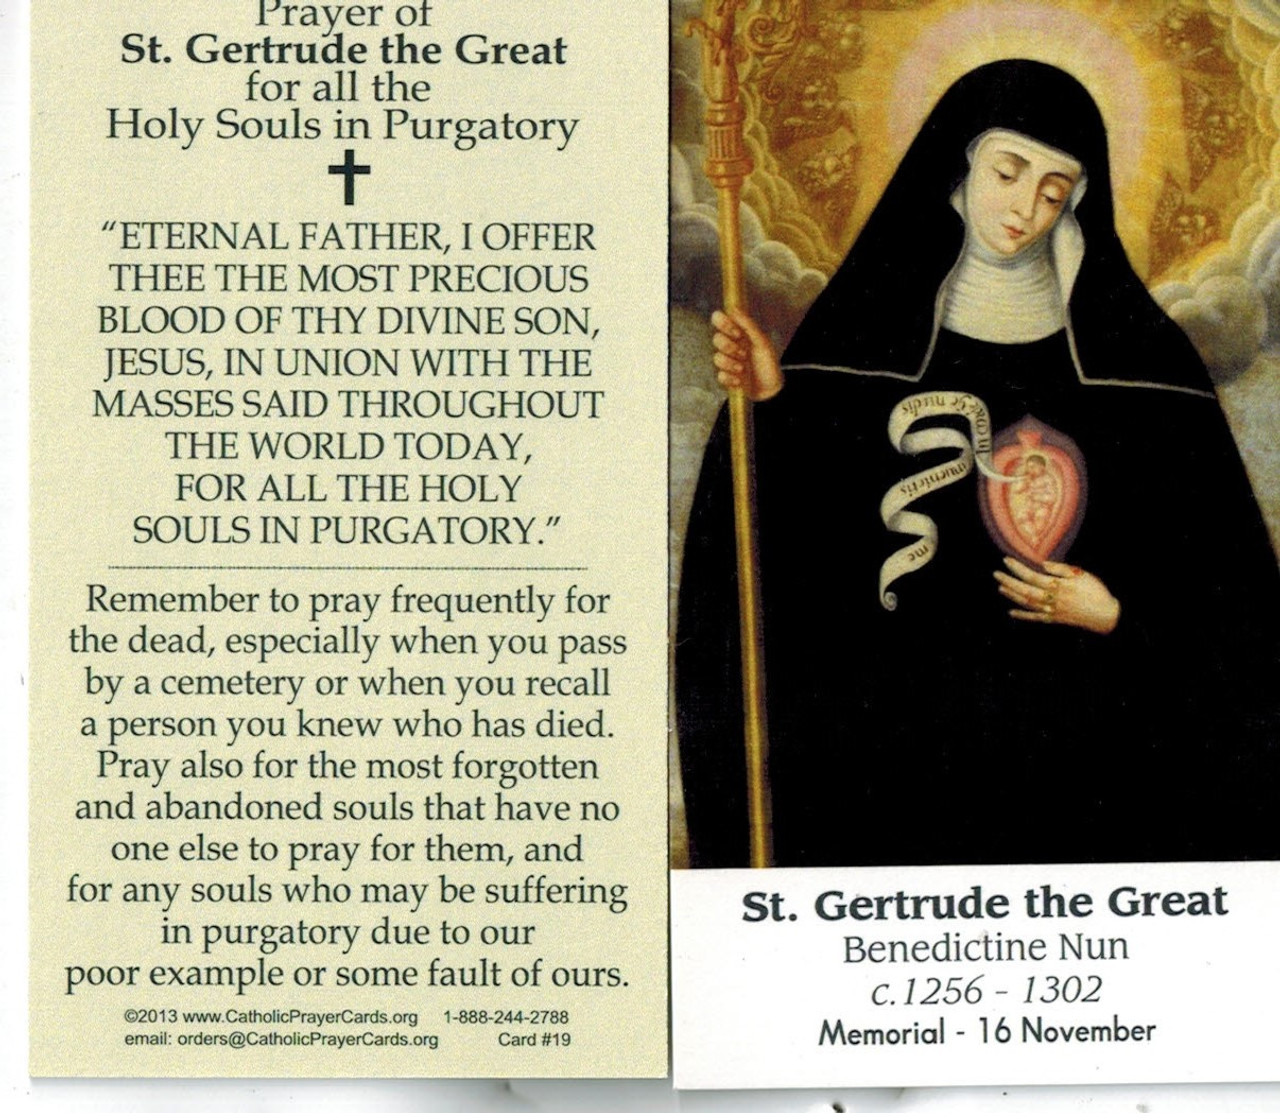  Prayer of Saint Gertrude the Great for the Souls in Purgatory